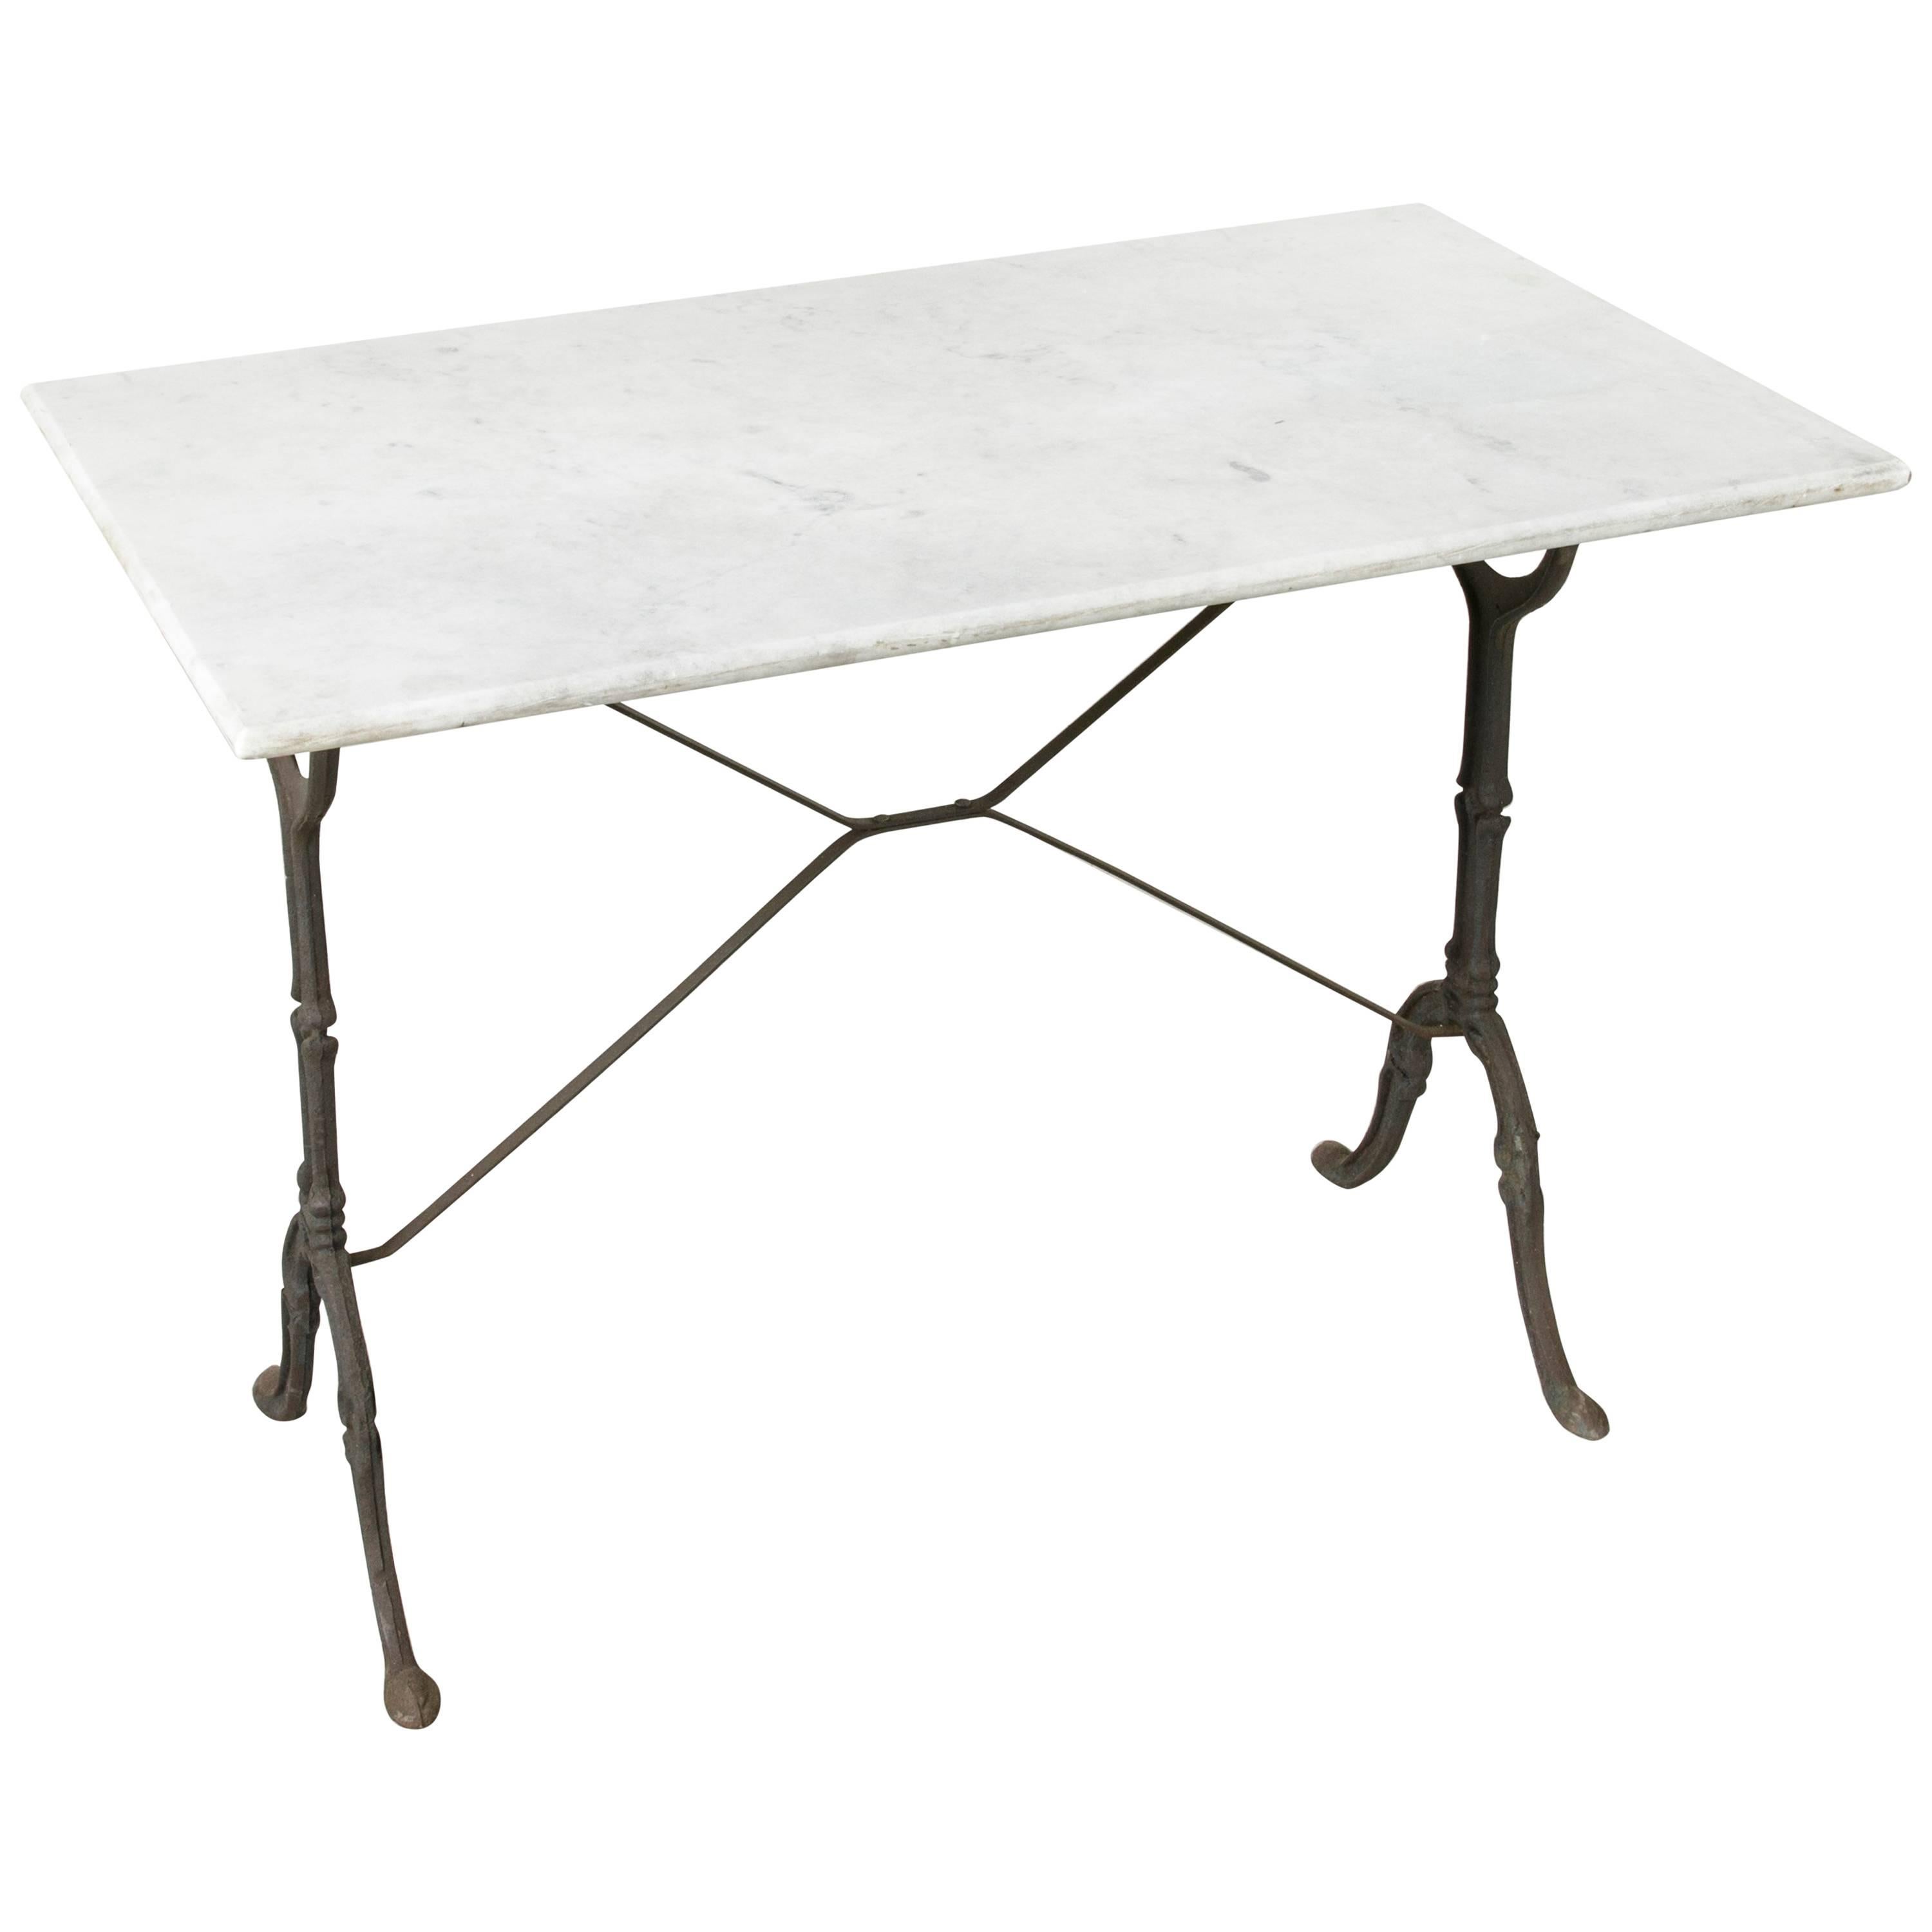 Mid-20th Century Iron Bistro Table, Cafe Table, Garden Table with Marble Top